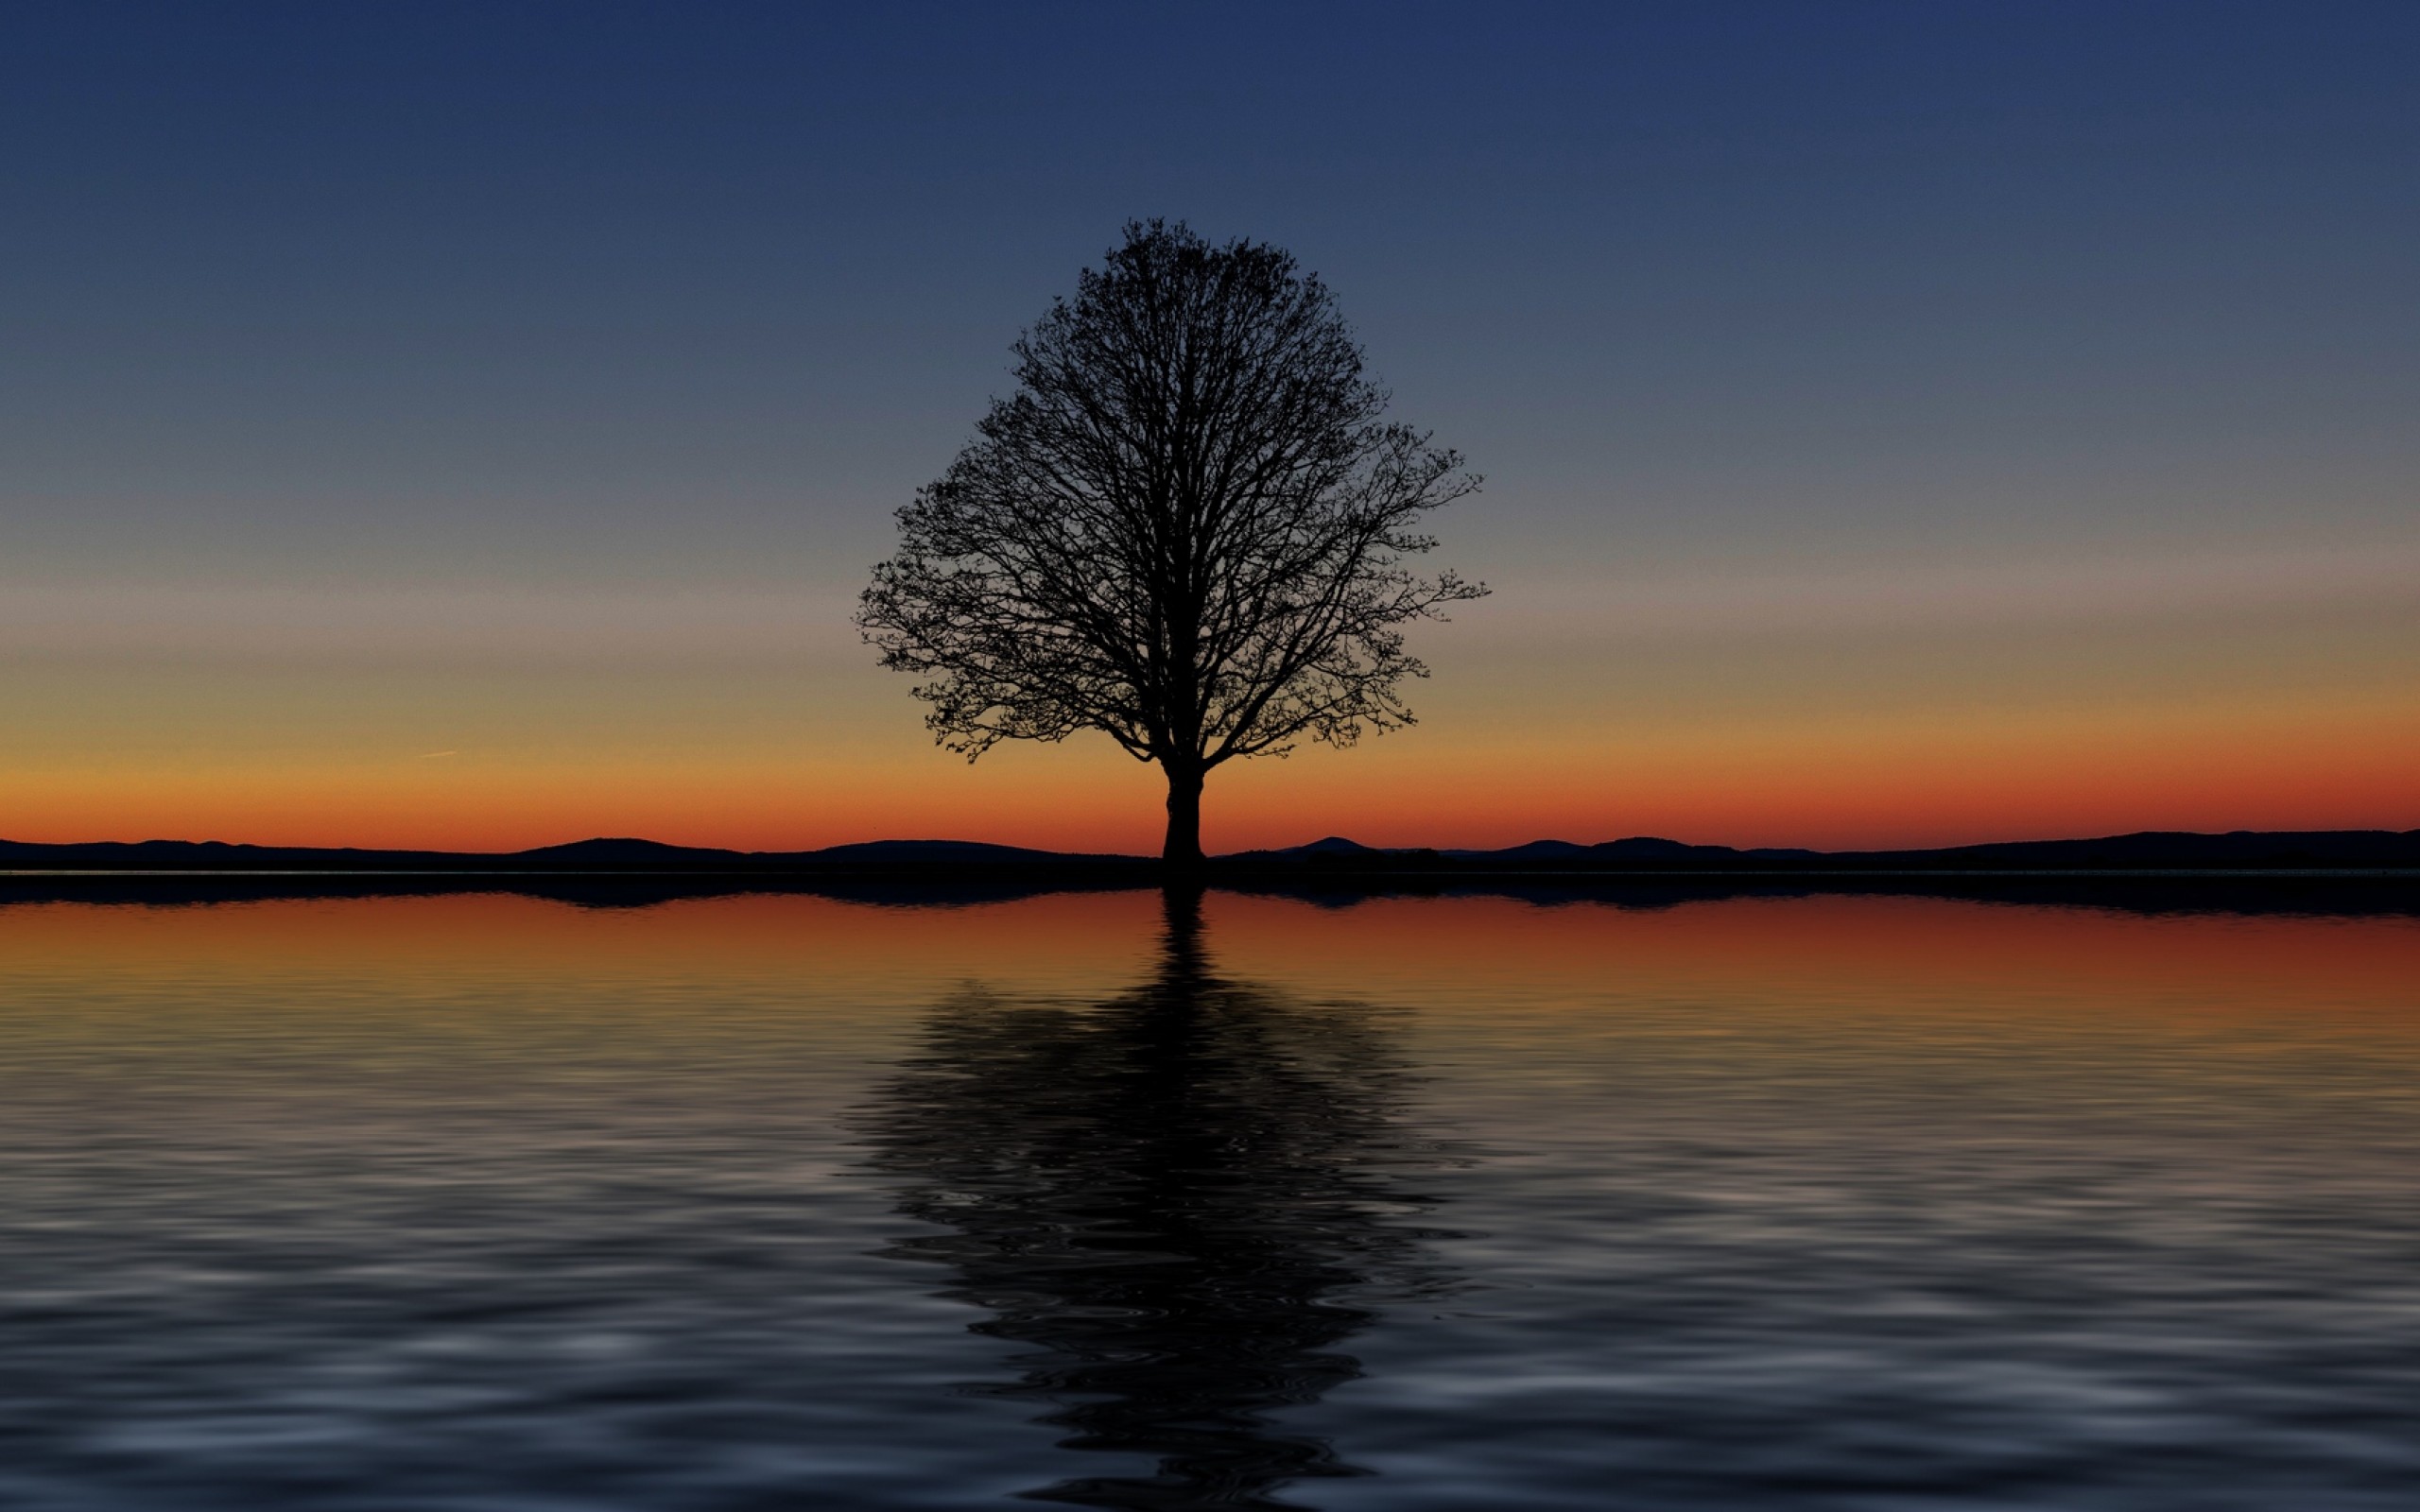 Reflection of a tree HD Wallpaper